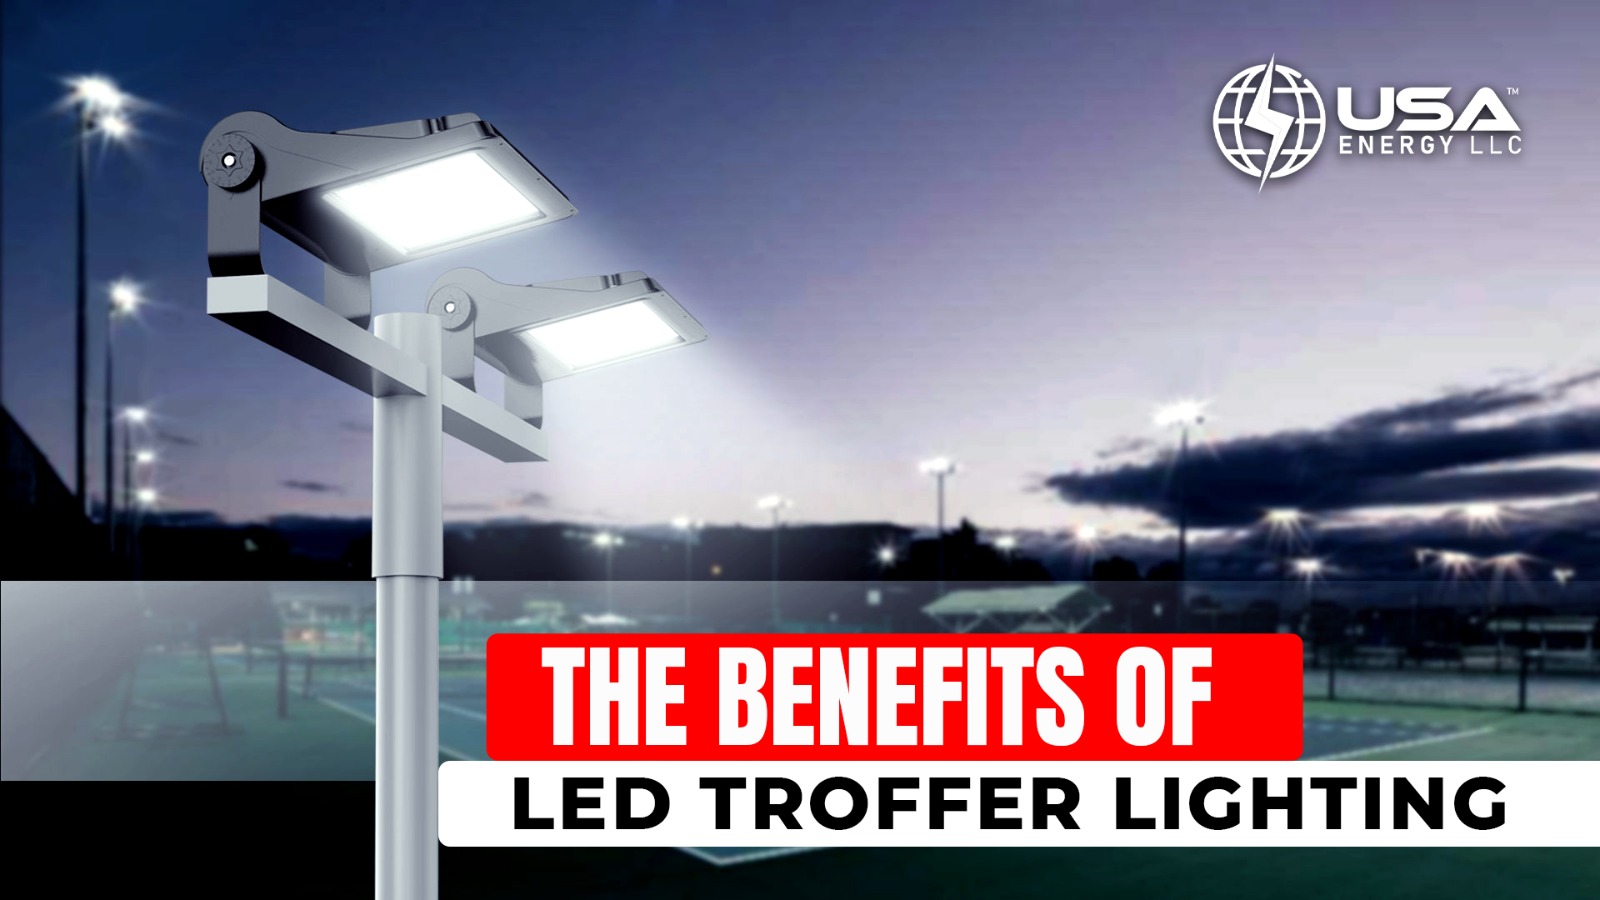 The Benefits of LED Troffer Lighting